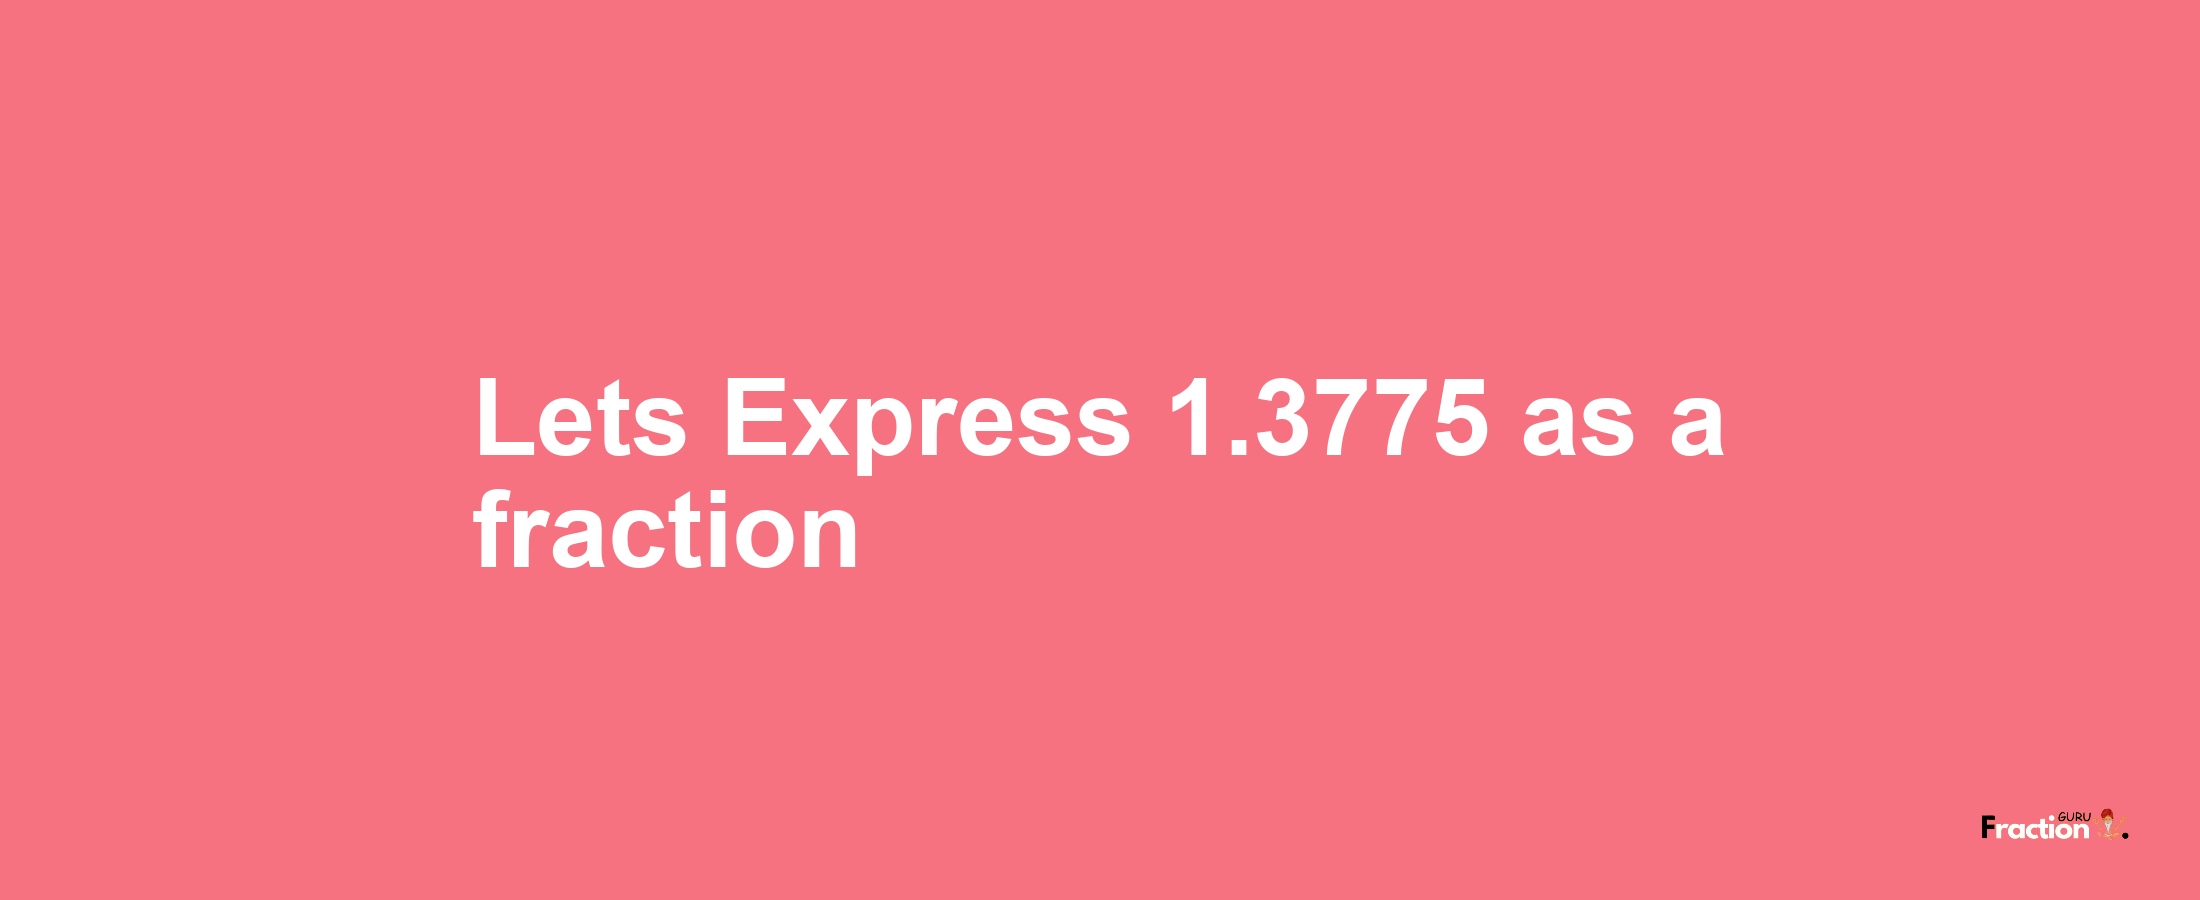 Lets Express 1.3775 as afraction